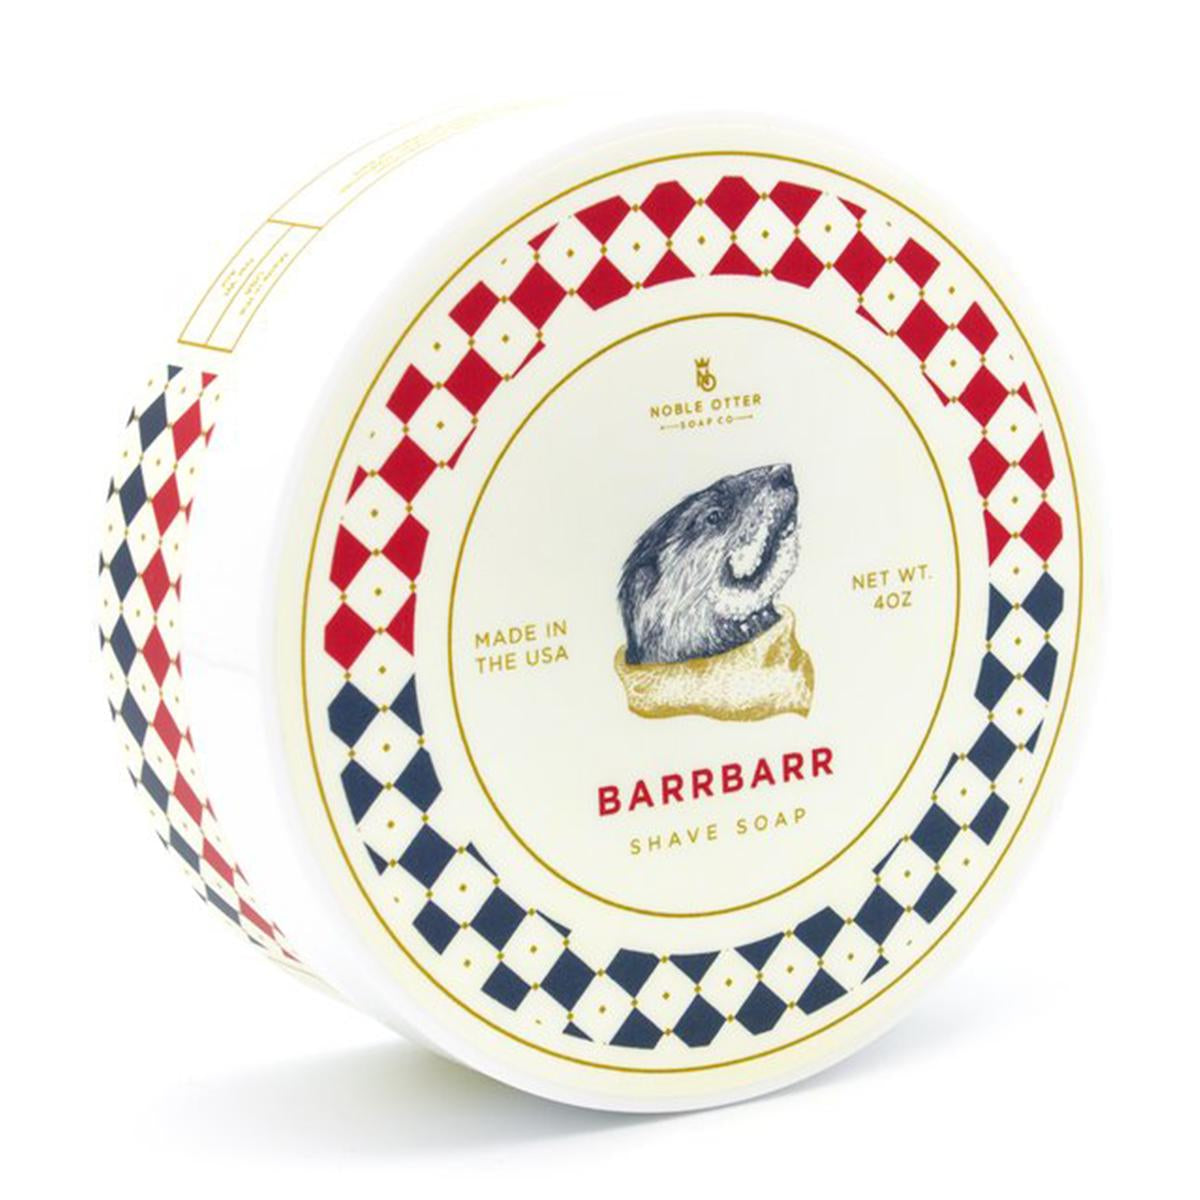 Primary image of Barrbarr Shaving Soap